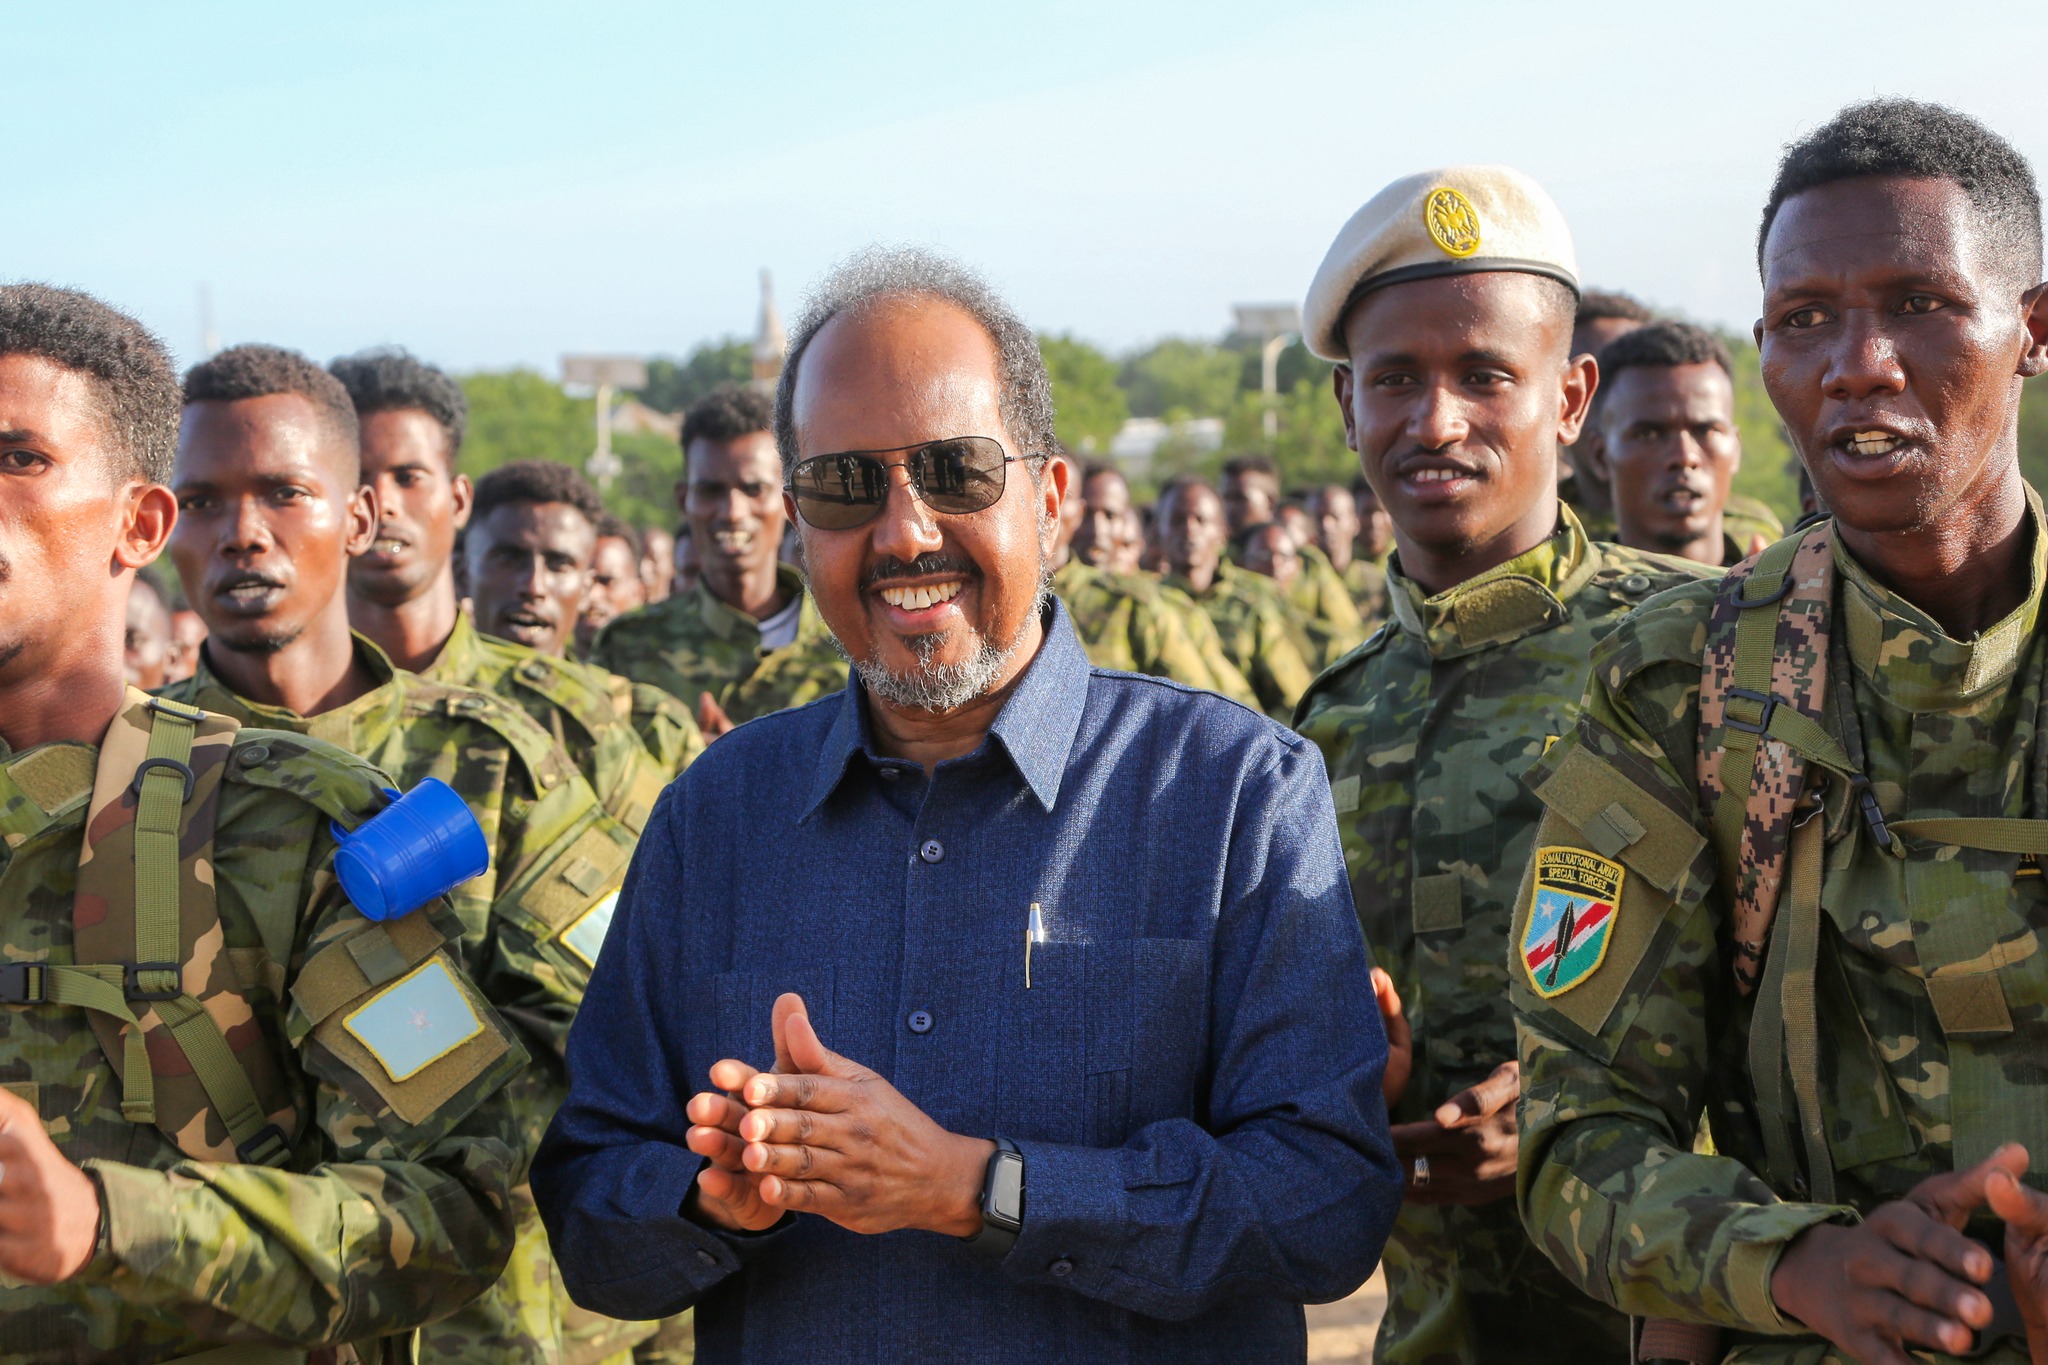 President Hassan Sheikh bids farewell to forces participating in the war against Al-Shabaab